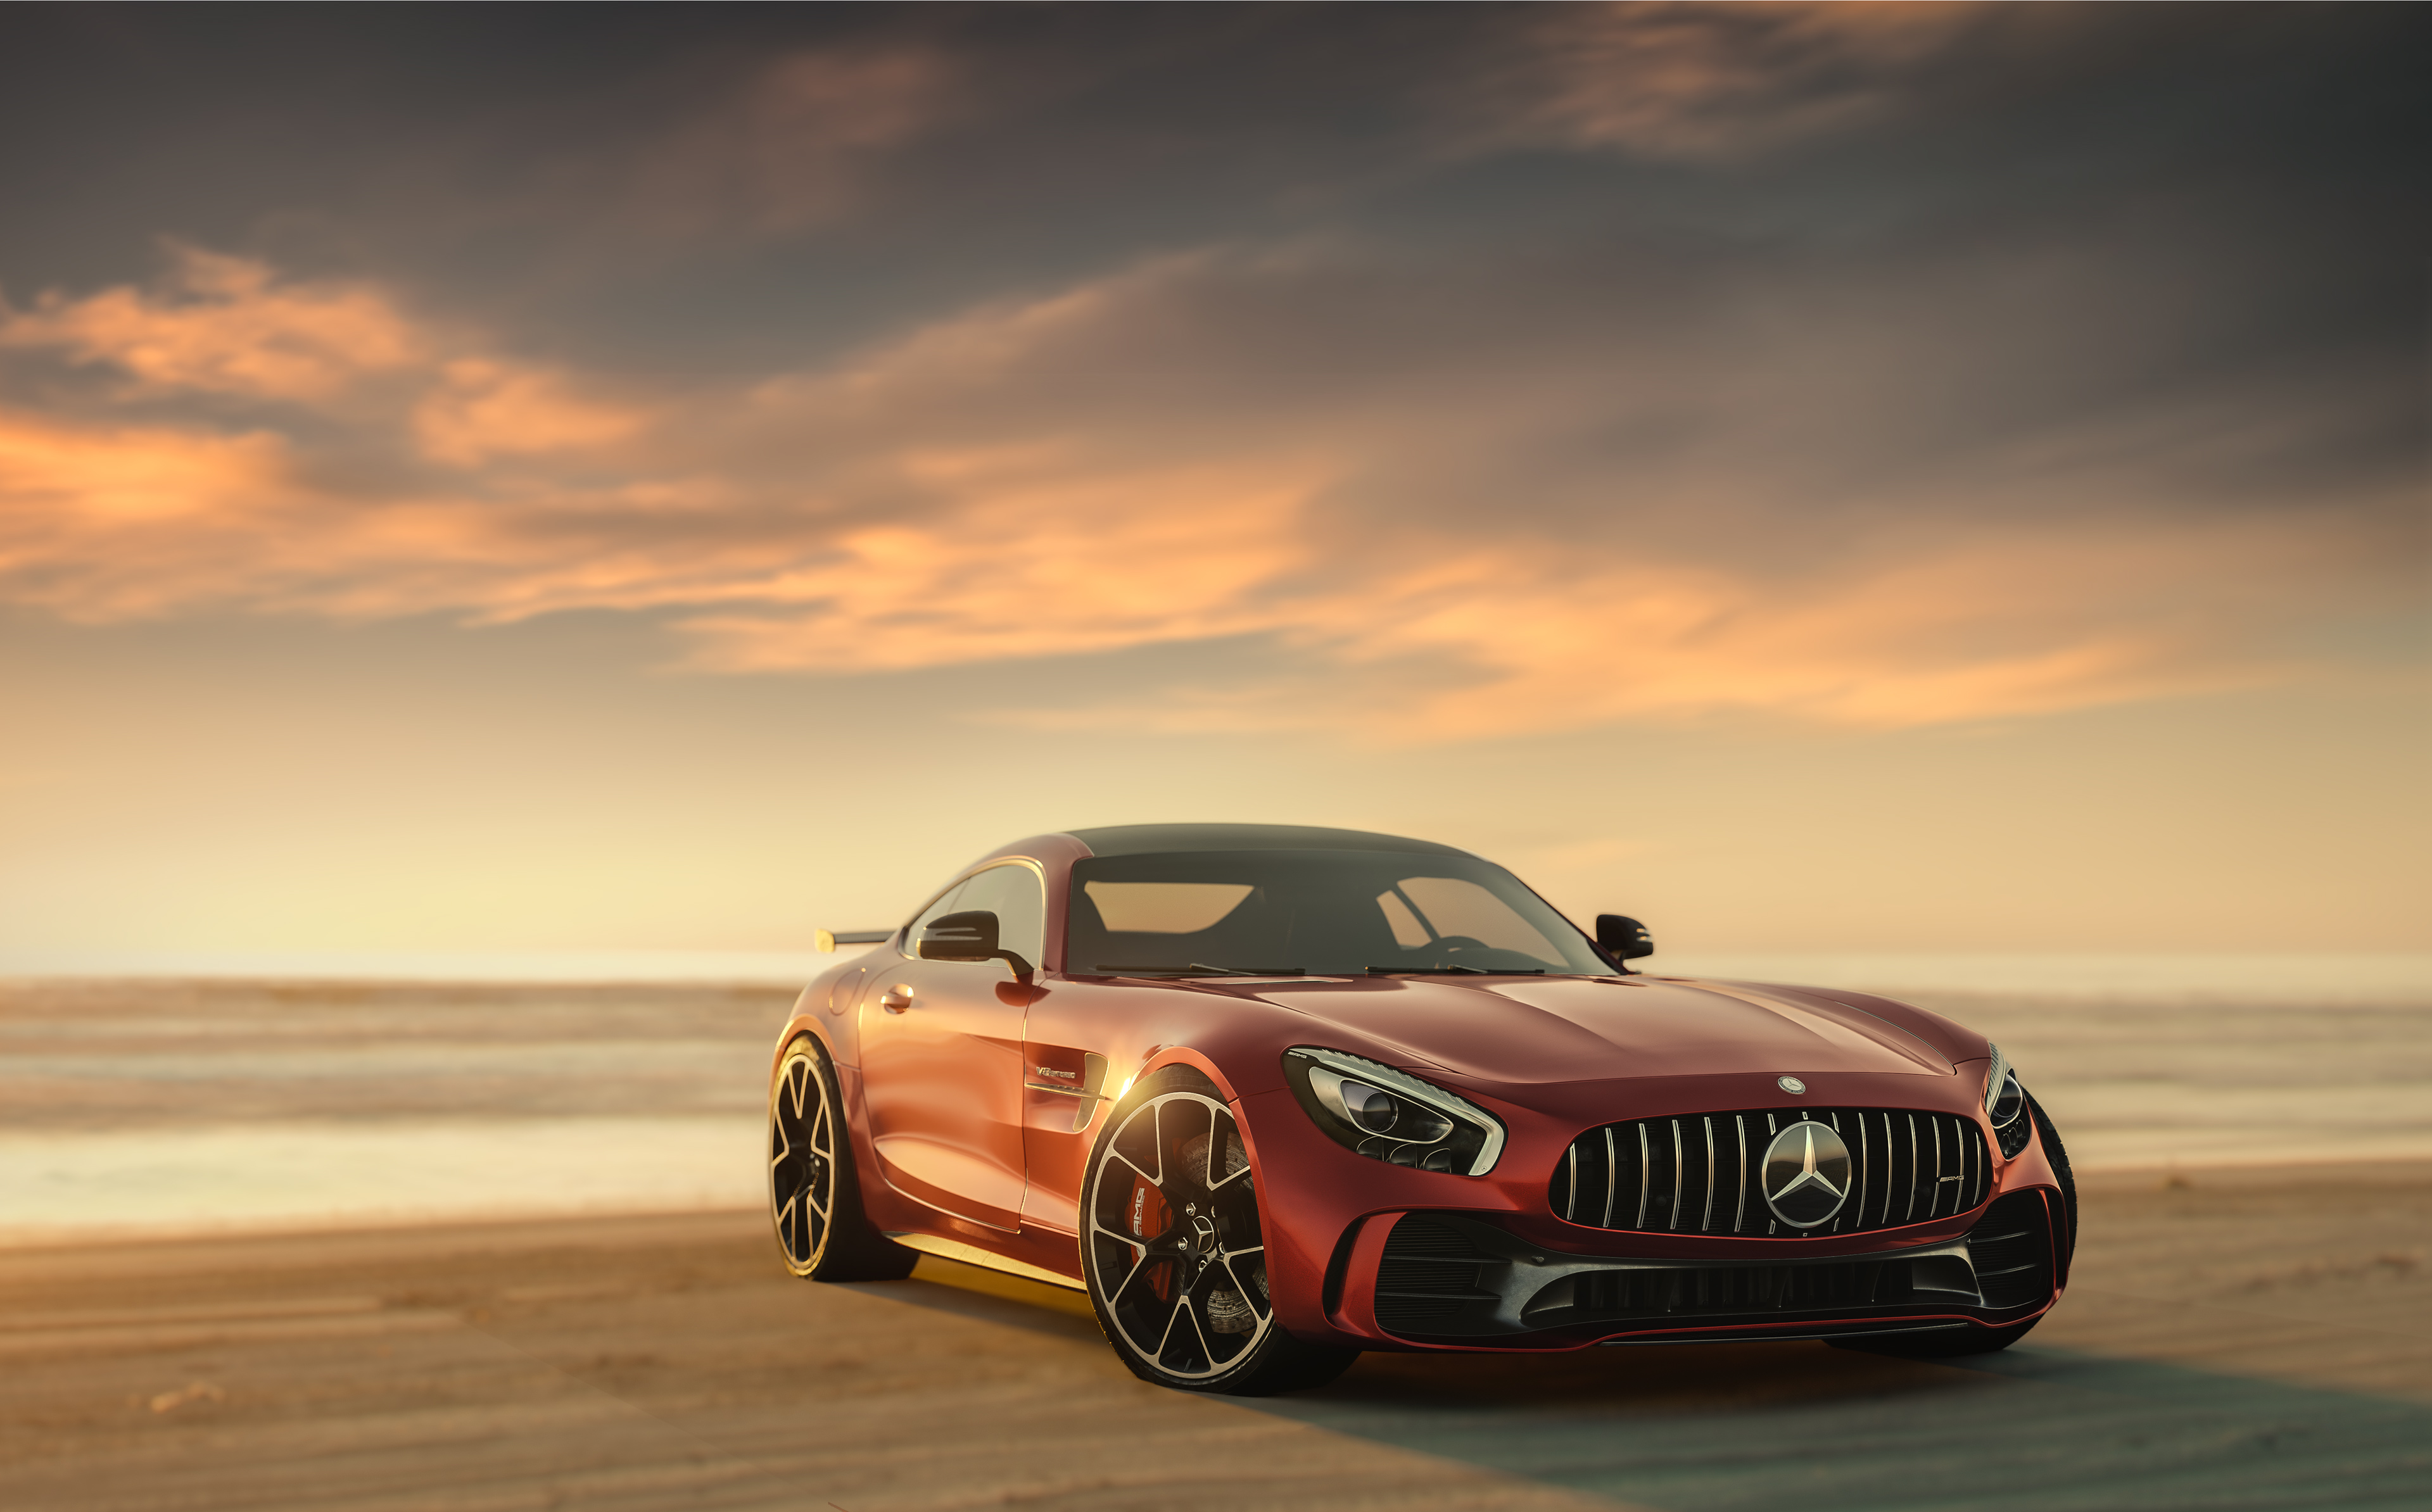 Mercedes Benz Amg Gt CGI 4K, HD Cars, 4k Wallpapers, Images